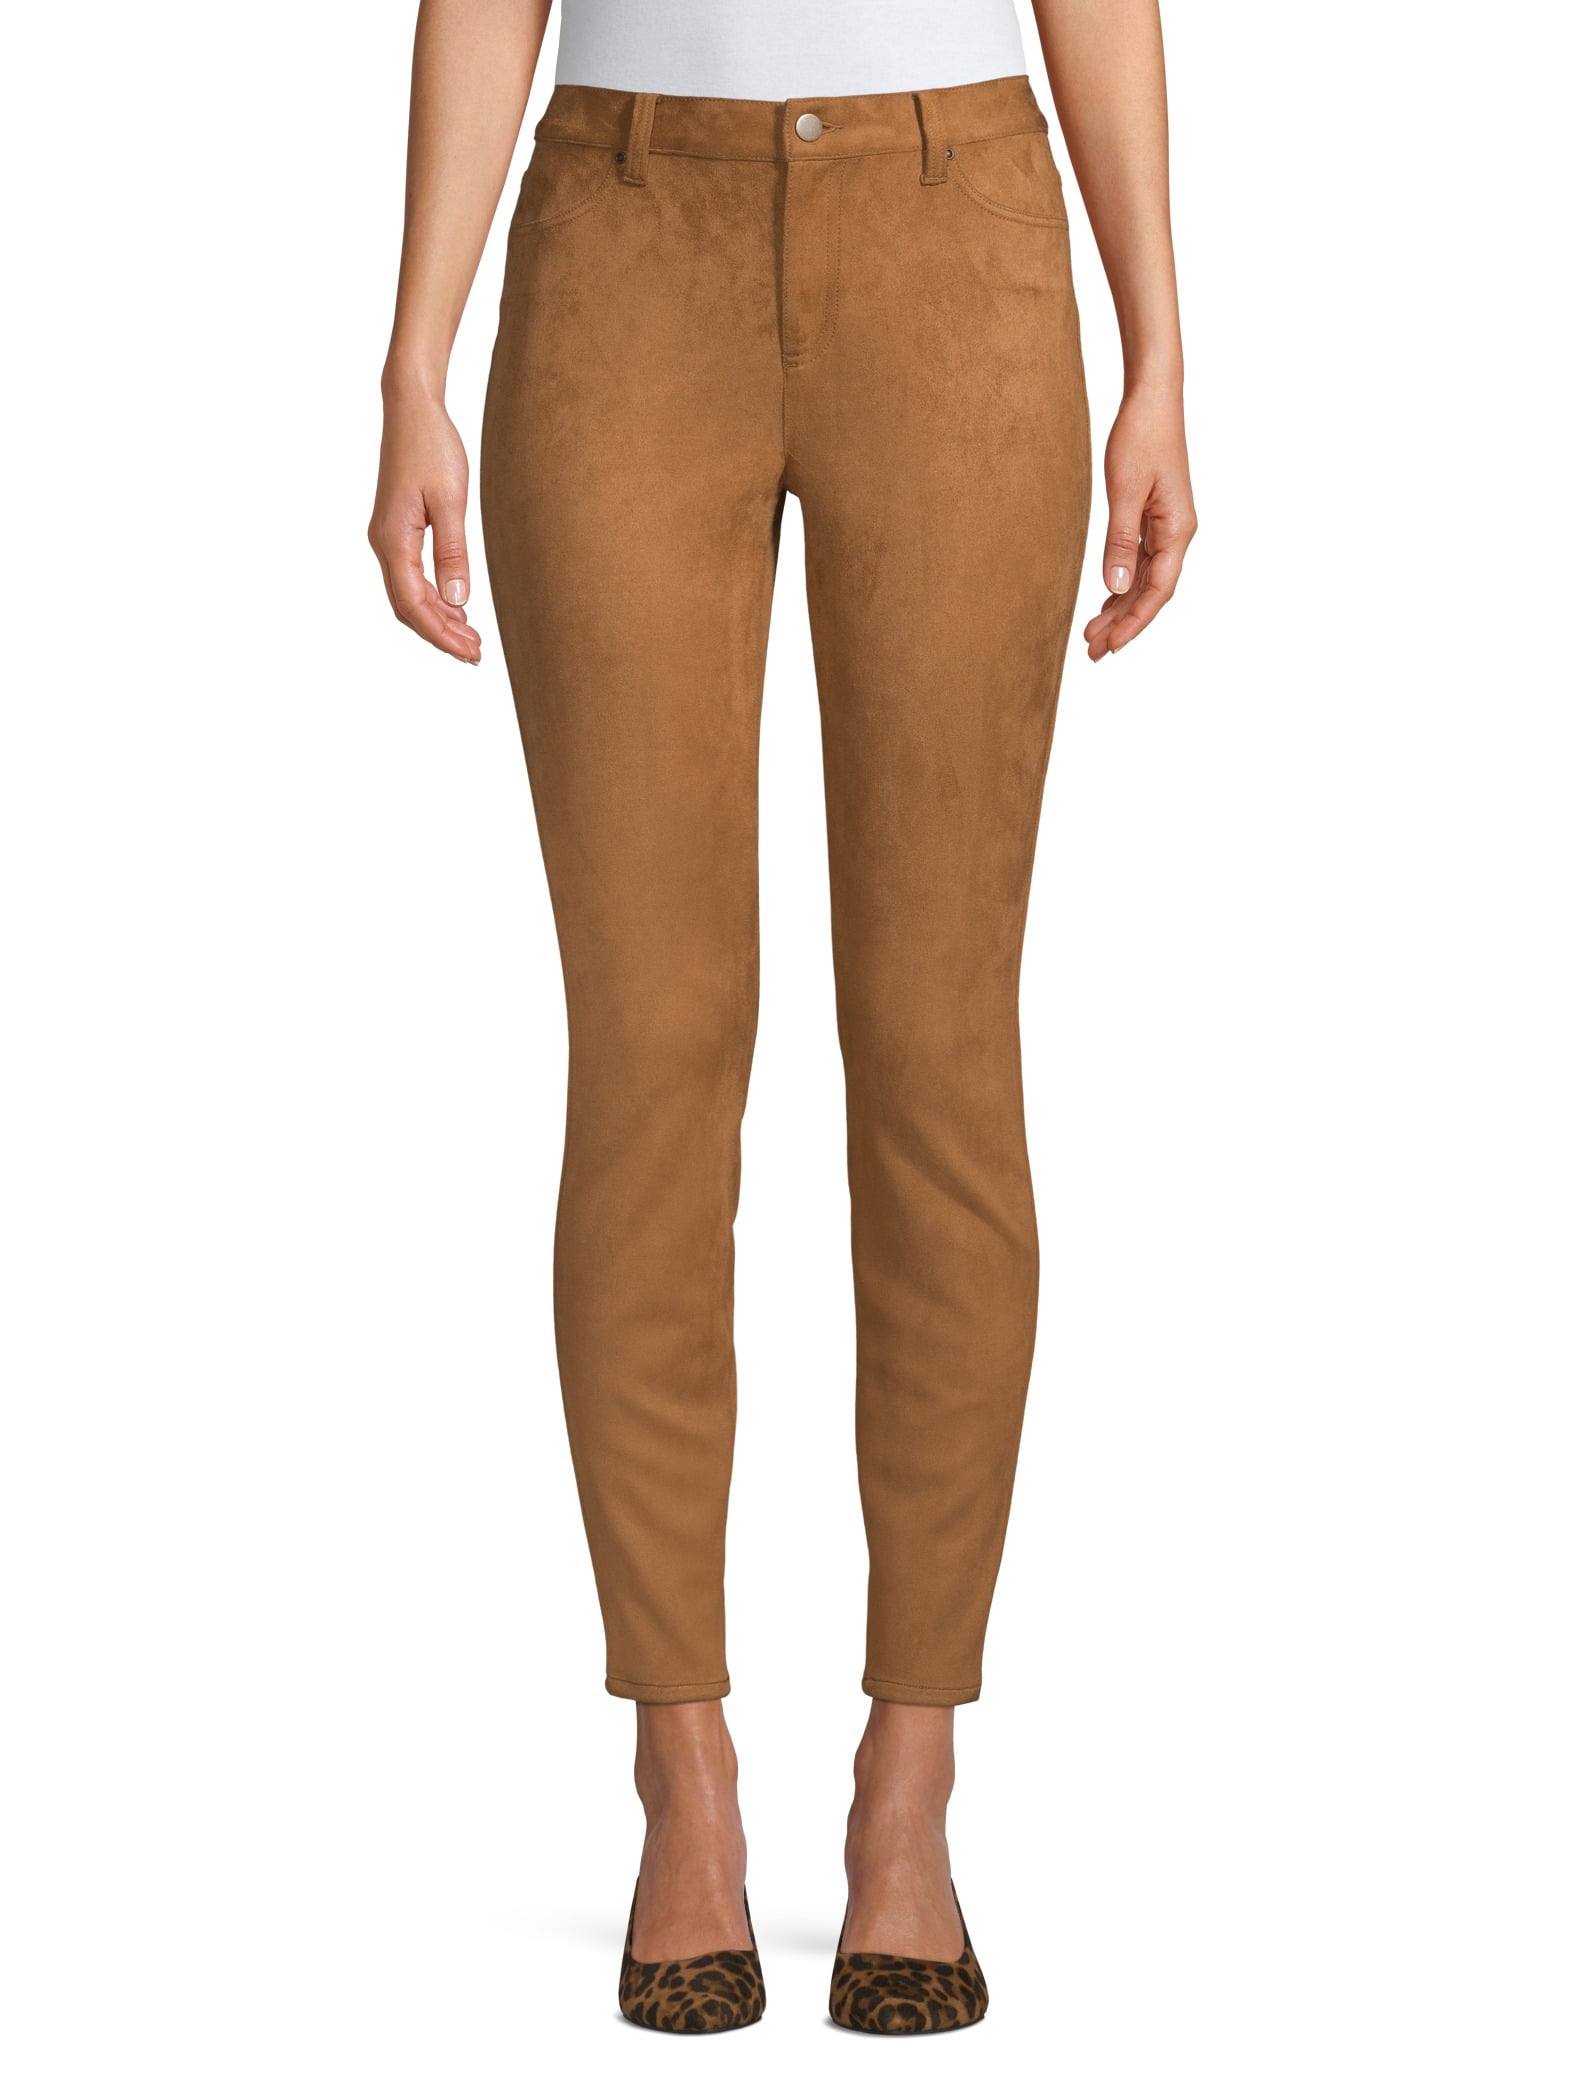 Express Pants Bell Flare Size 0 Reg Mid Rise Faux Suede Camel Inseam 34 NWT $98